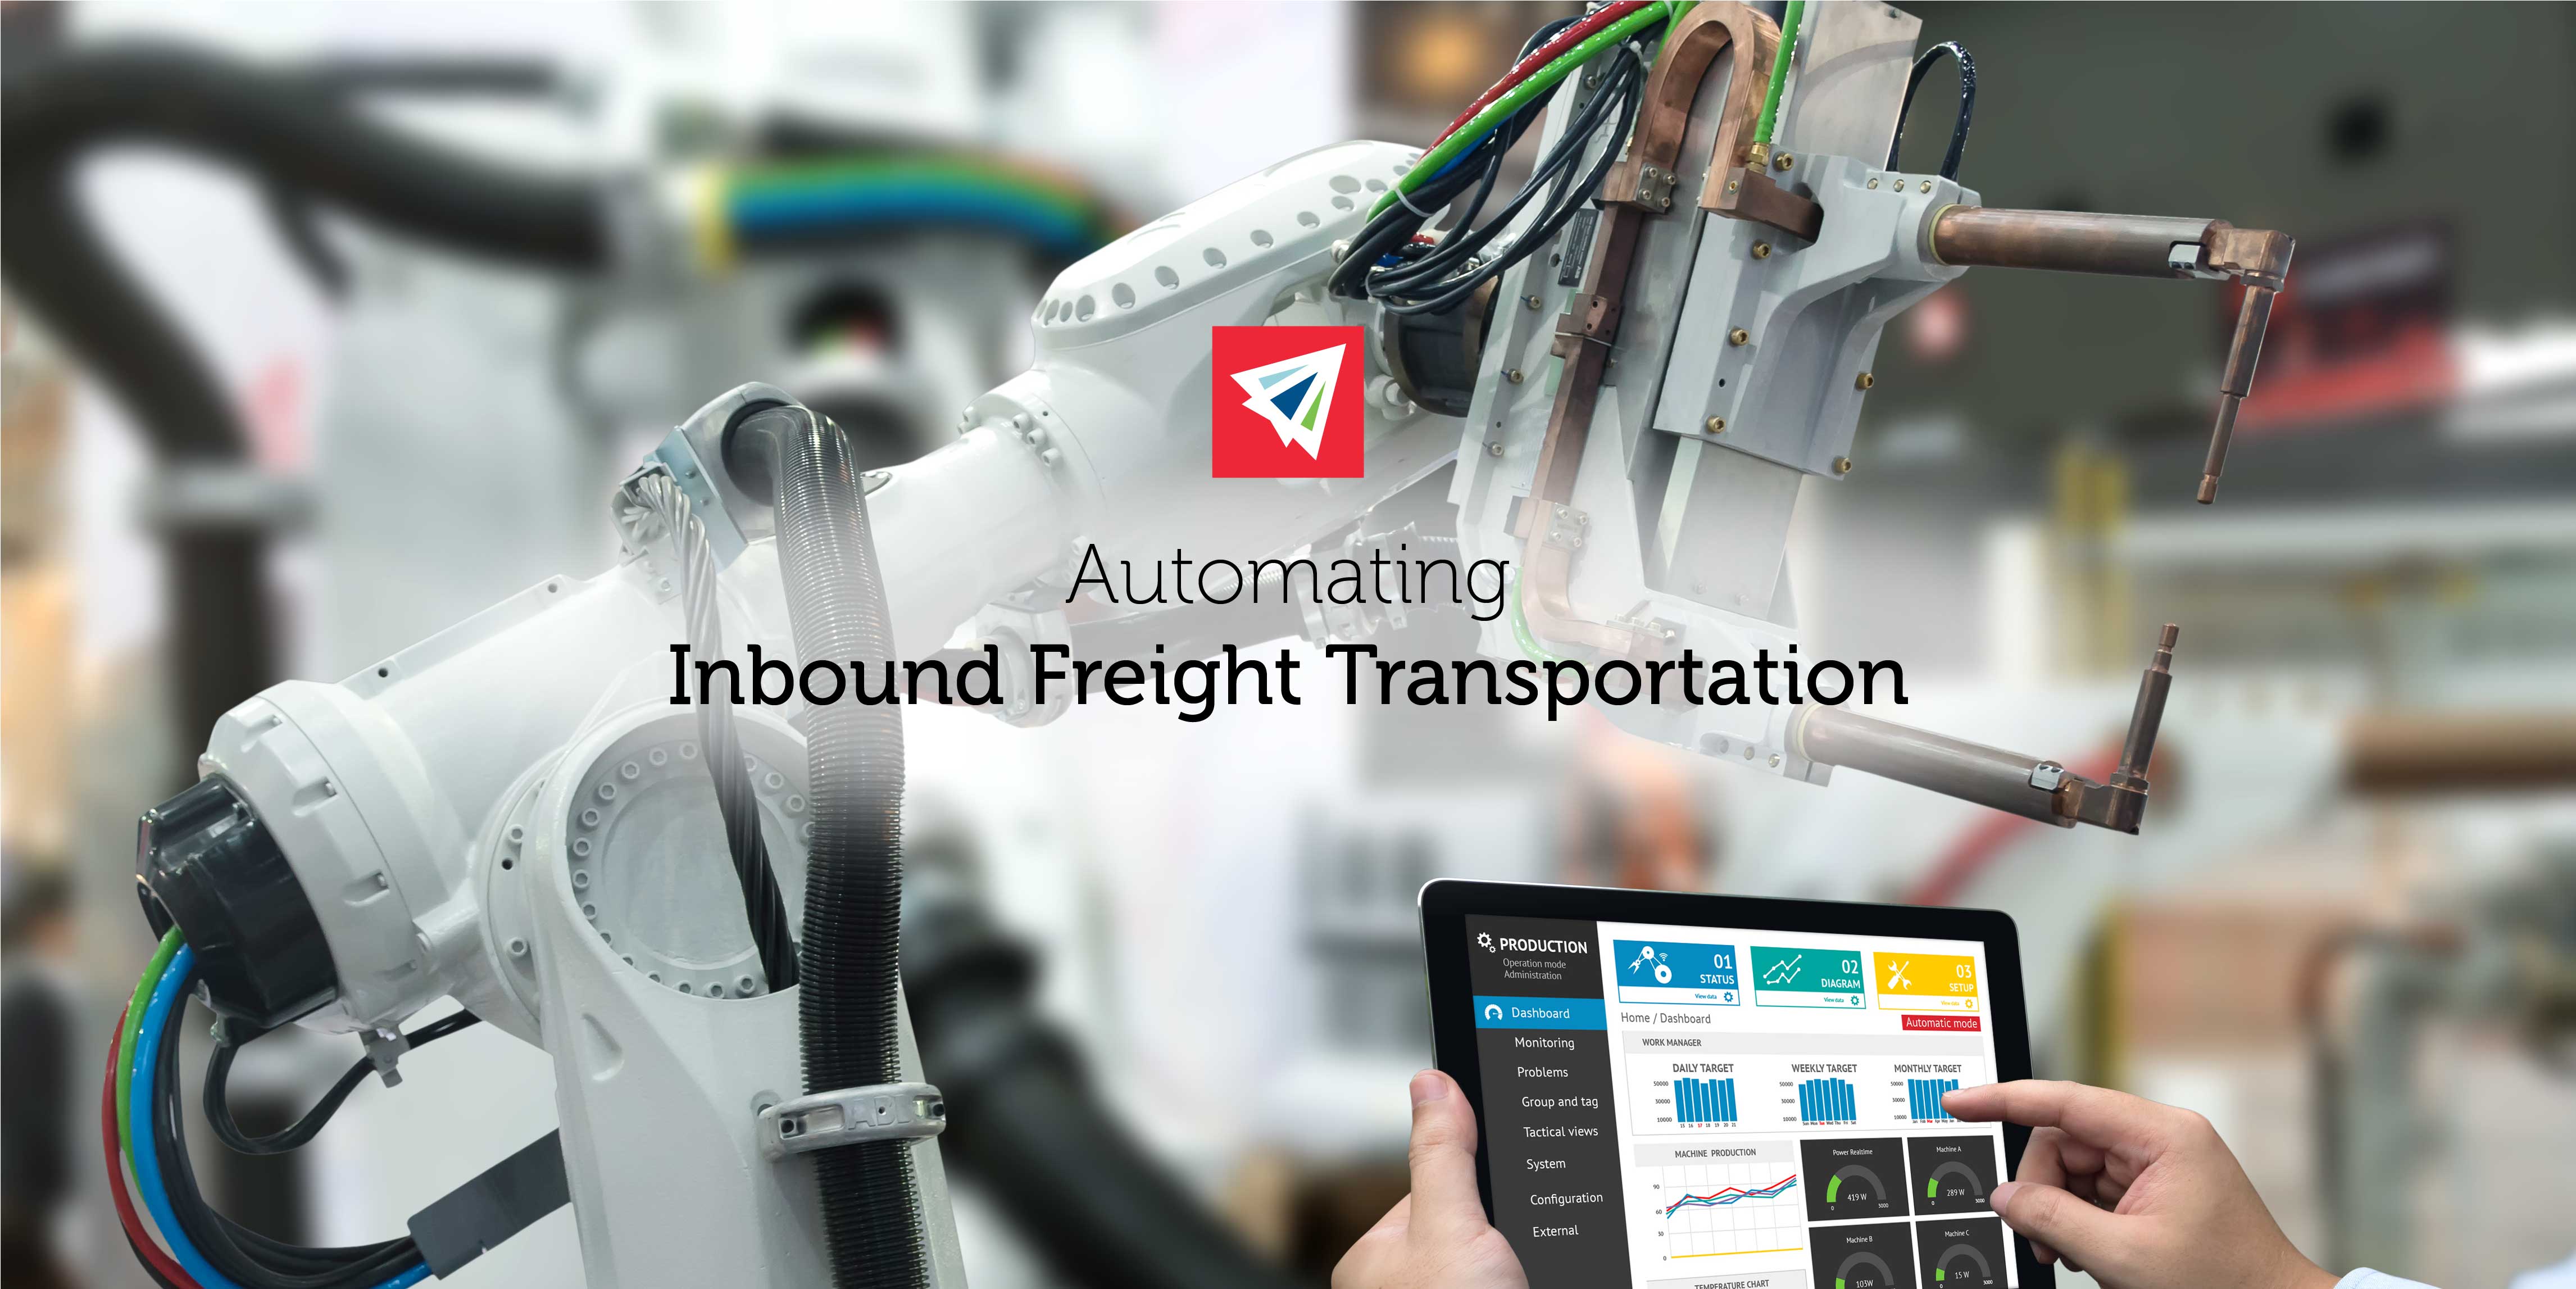 Automating Inbound Freight Transportation